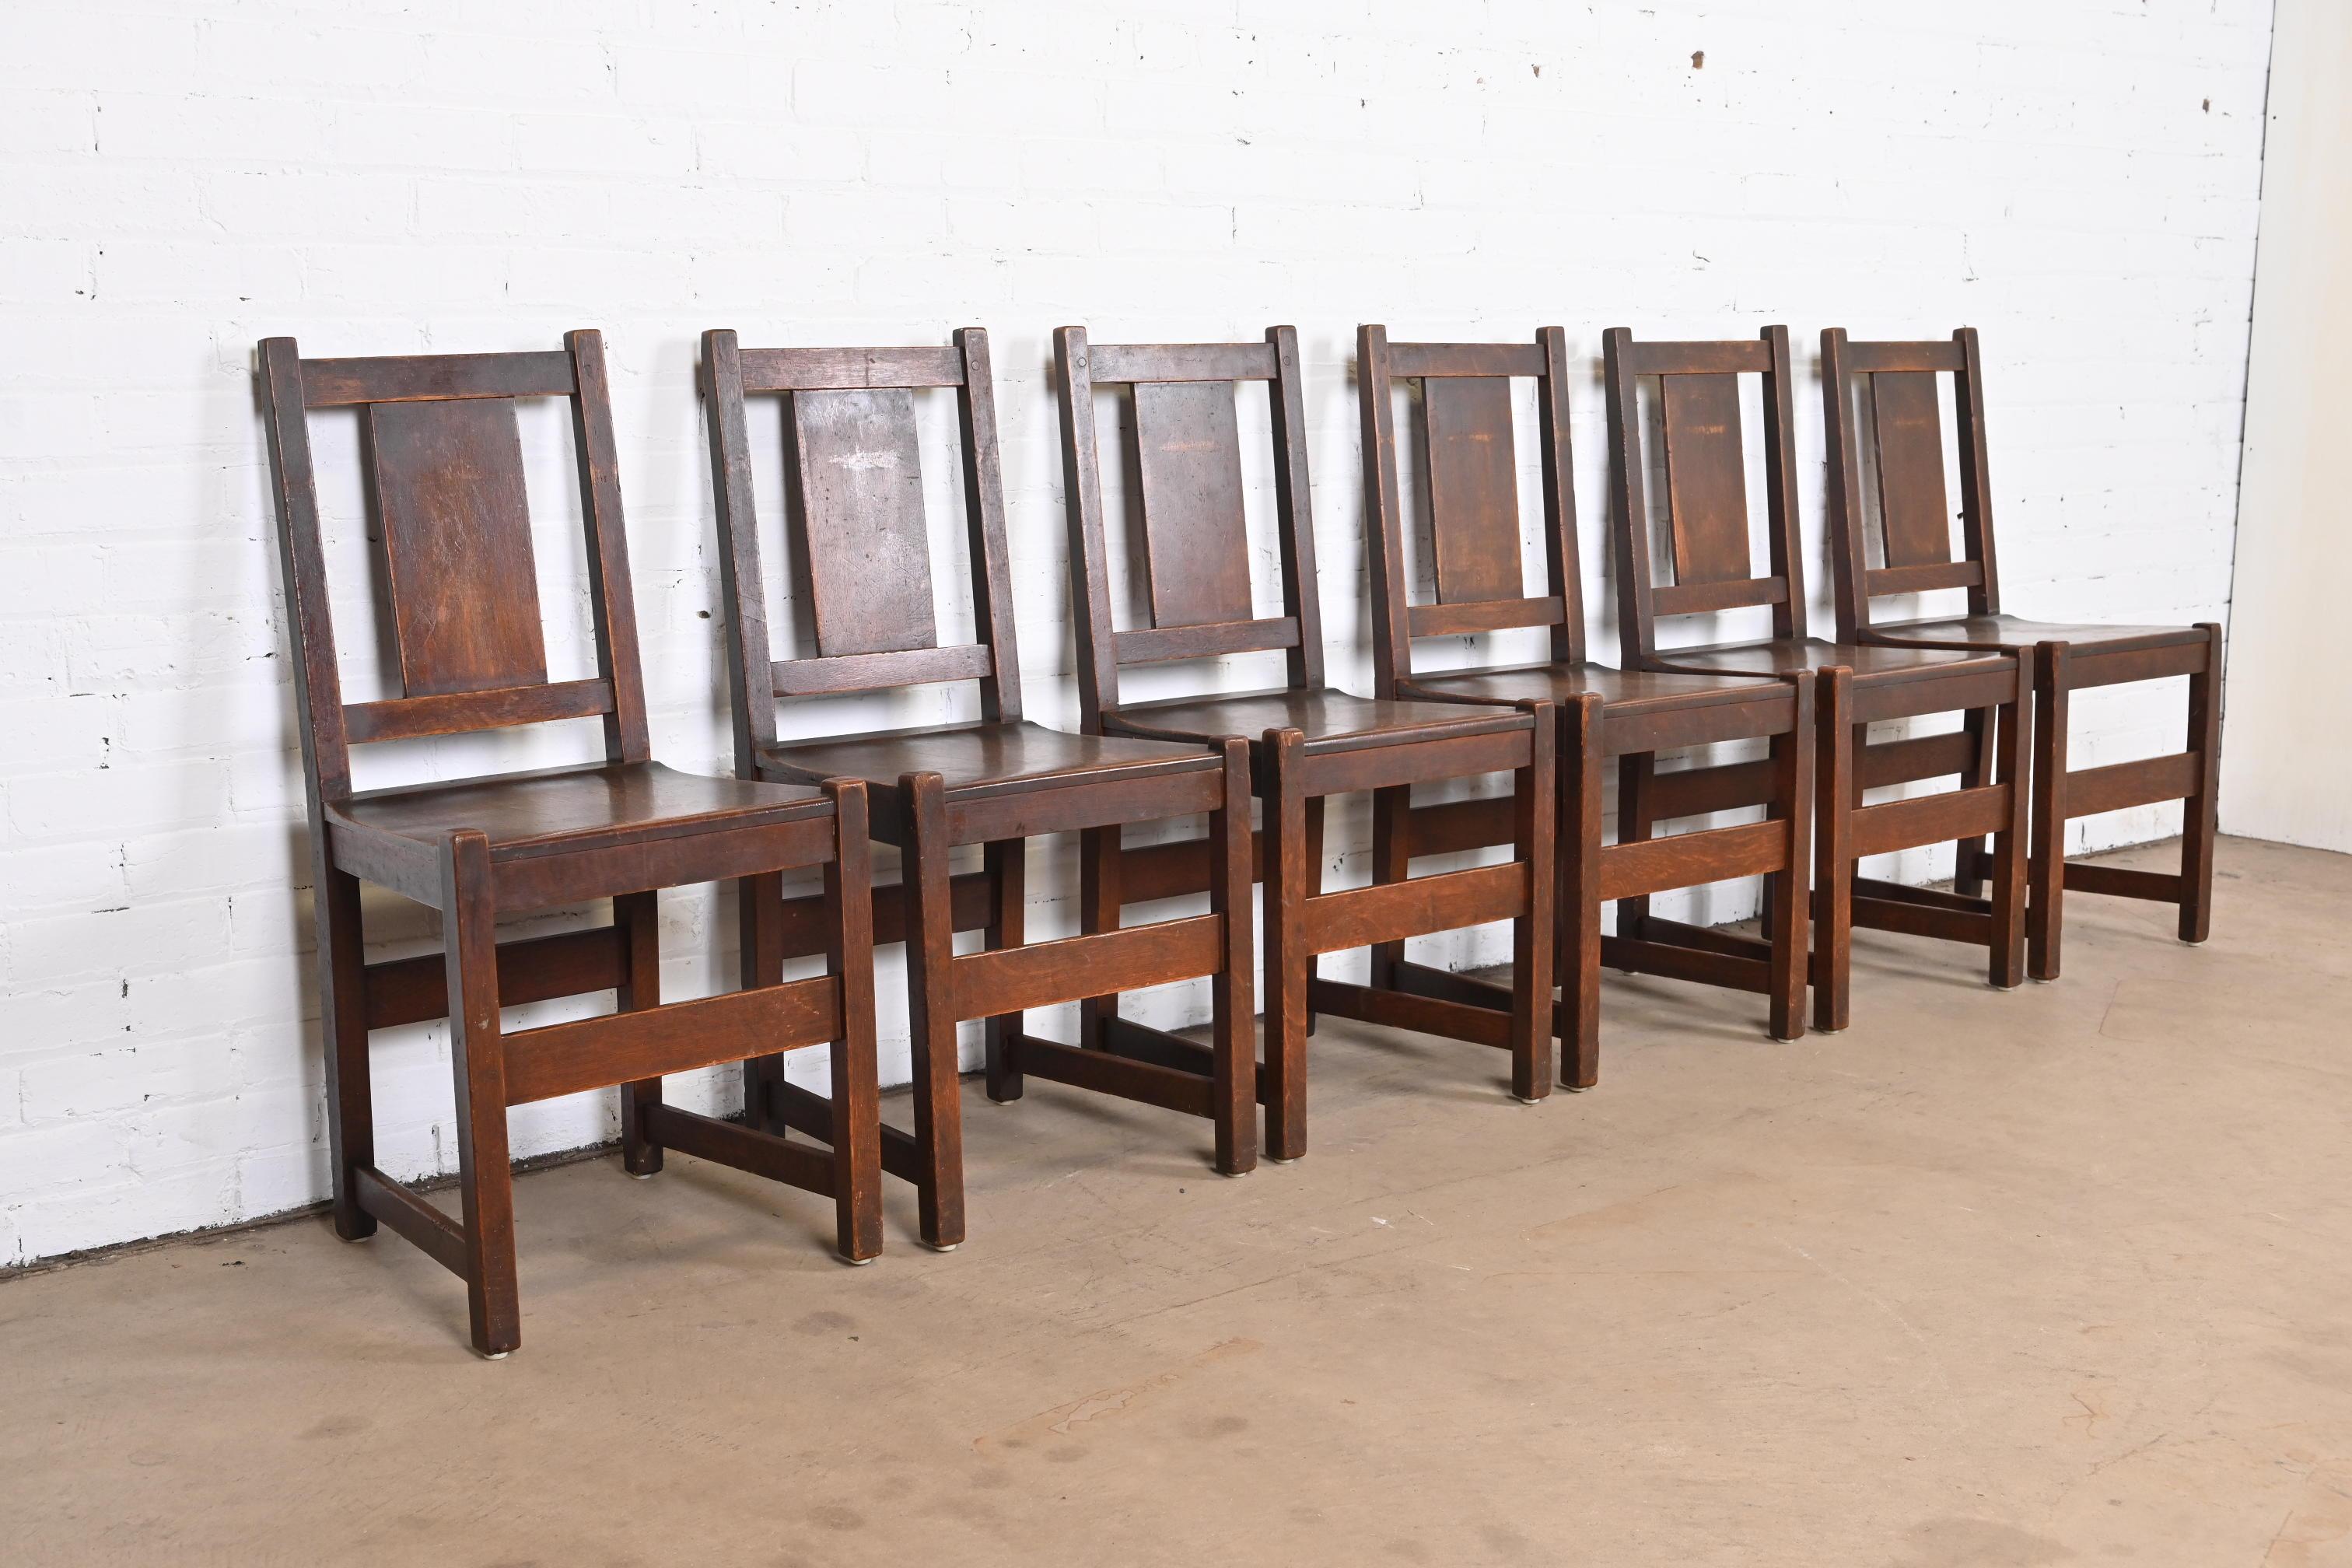 20th Century Antique Signed Stickley Mission Oak Arts & Crafts Dining Chairs, Circa 1900